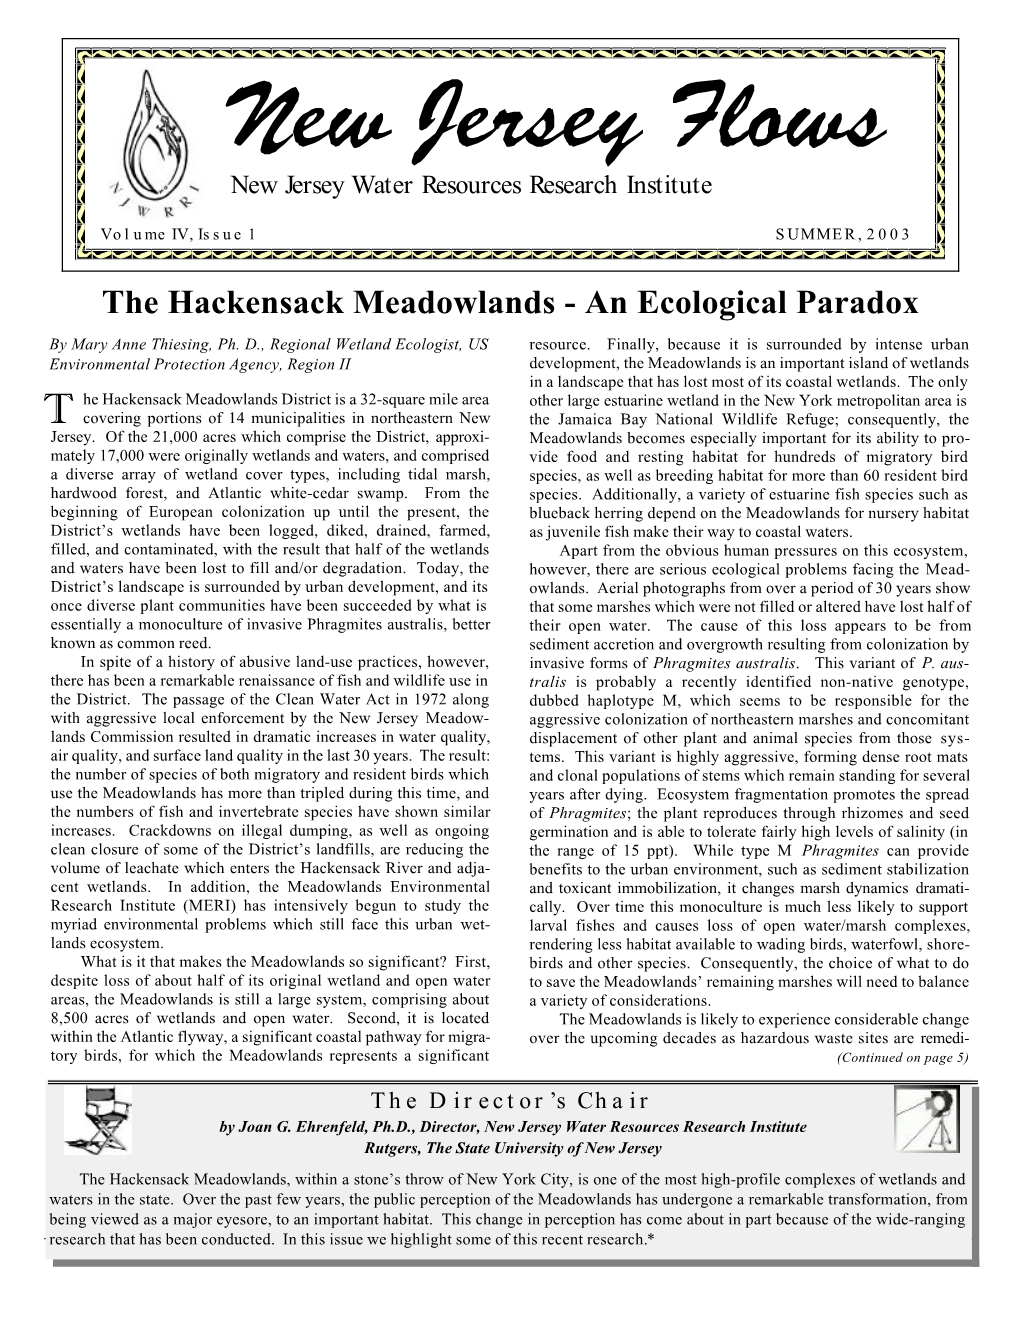 The Hackensack Meadowlands - an Ecological Paradox by Mary Anne Thiesing, Ph